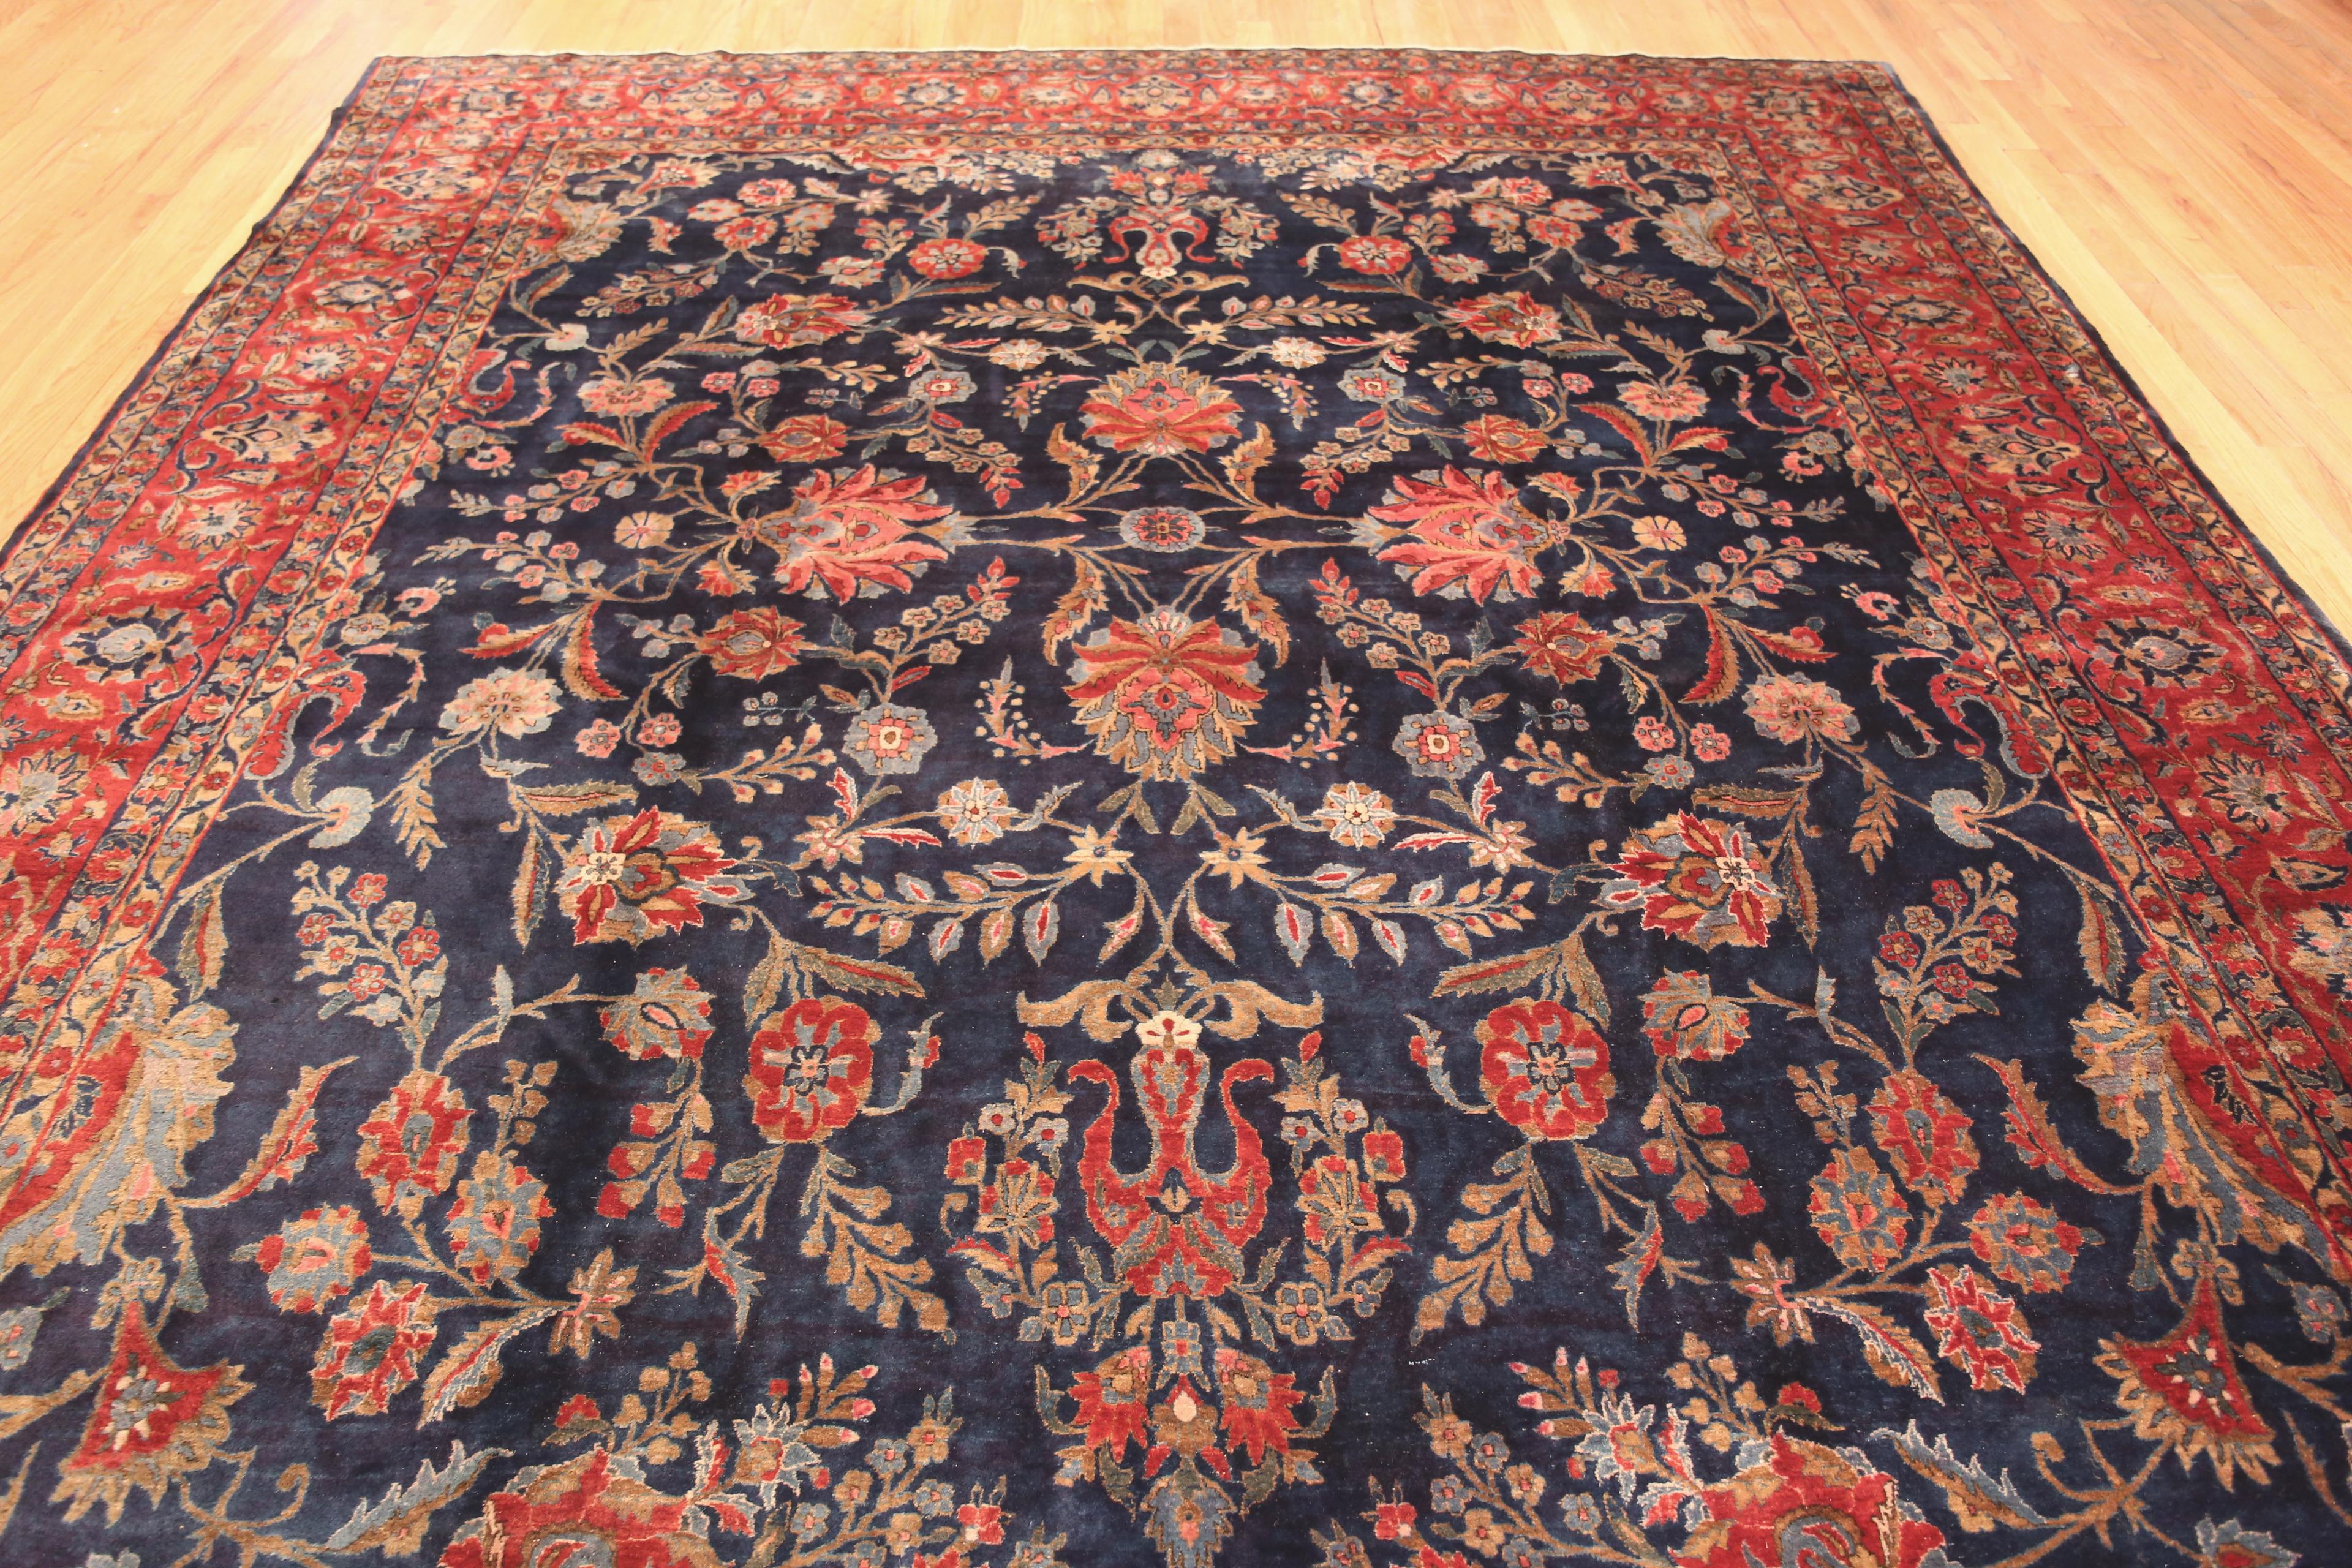 Luxurious Fine Oversized Antique Persian Traditional Kashan Manchester Wool Rug, Country of origin: Persia, Circa date: 1900. Size: 11 ft x 20 ft 8 in (3.35 m x 6.3 m)
 